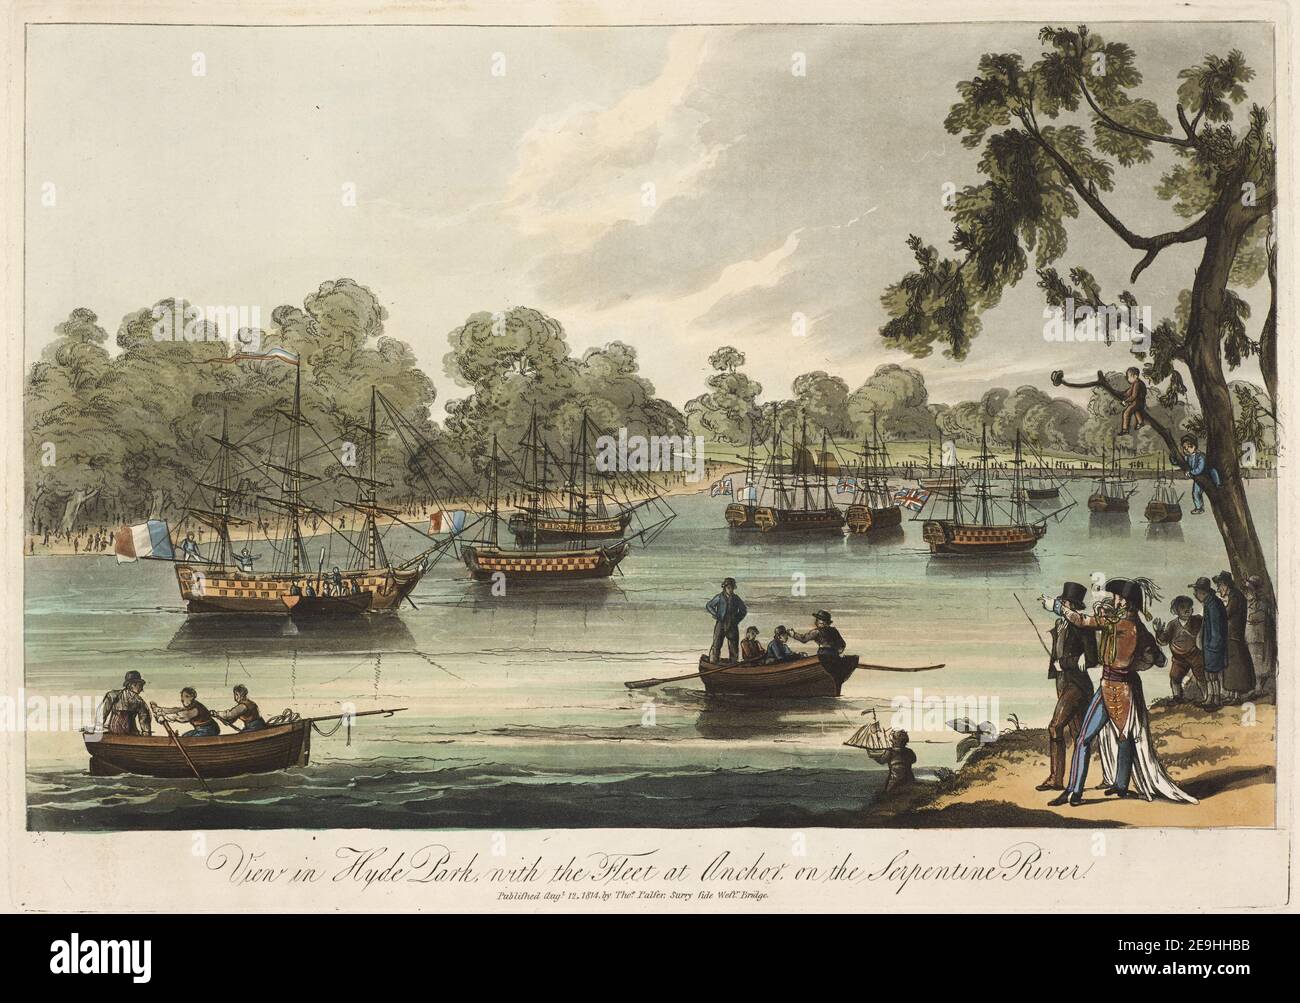 View in Hyde Park, with the Fleet at Anchor, on the Serpentine River. Author  Palser 26.6.m. Place of publication: [London] Publisher: Published Augt 12, 1814, by Thos Palser, Surry Side West Bridge, Date of publication: [August 12 1814]  Item type: 1 print Medium: etching and aquatint with hand-colouring Dimensions: plate 24.7 x 35 cm, on sheet 27.9 x 41.5 cm  Former owner: George III, King of Great Britain, 1738-1820 Stock Photo